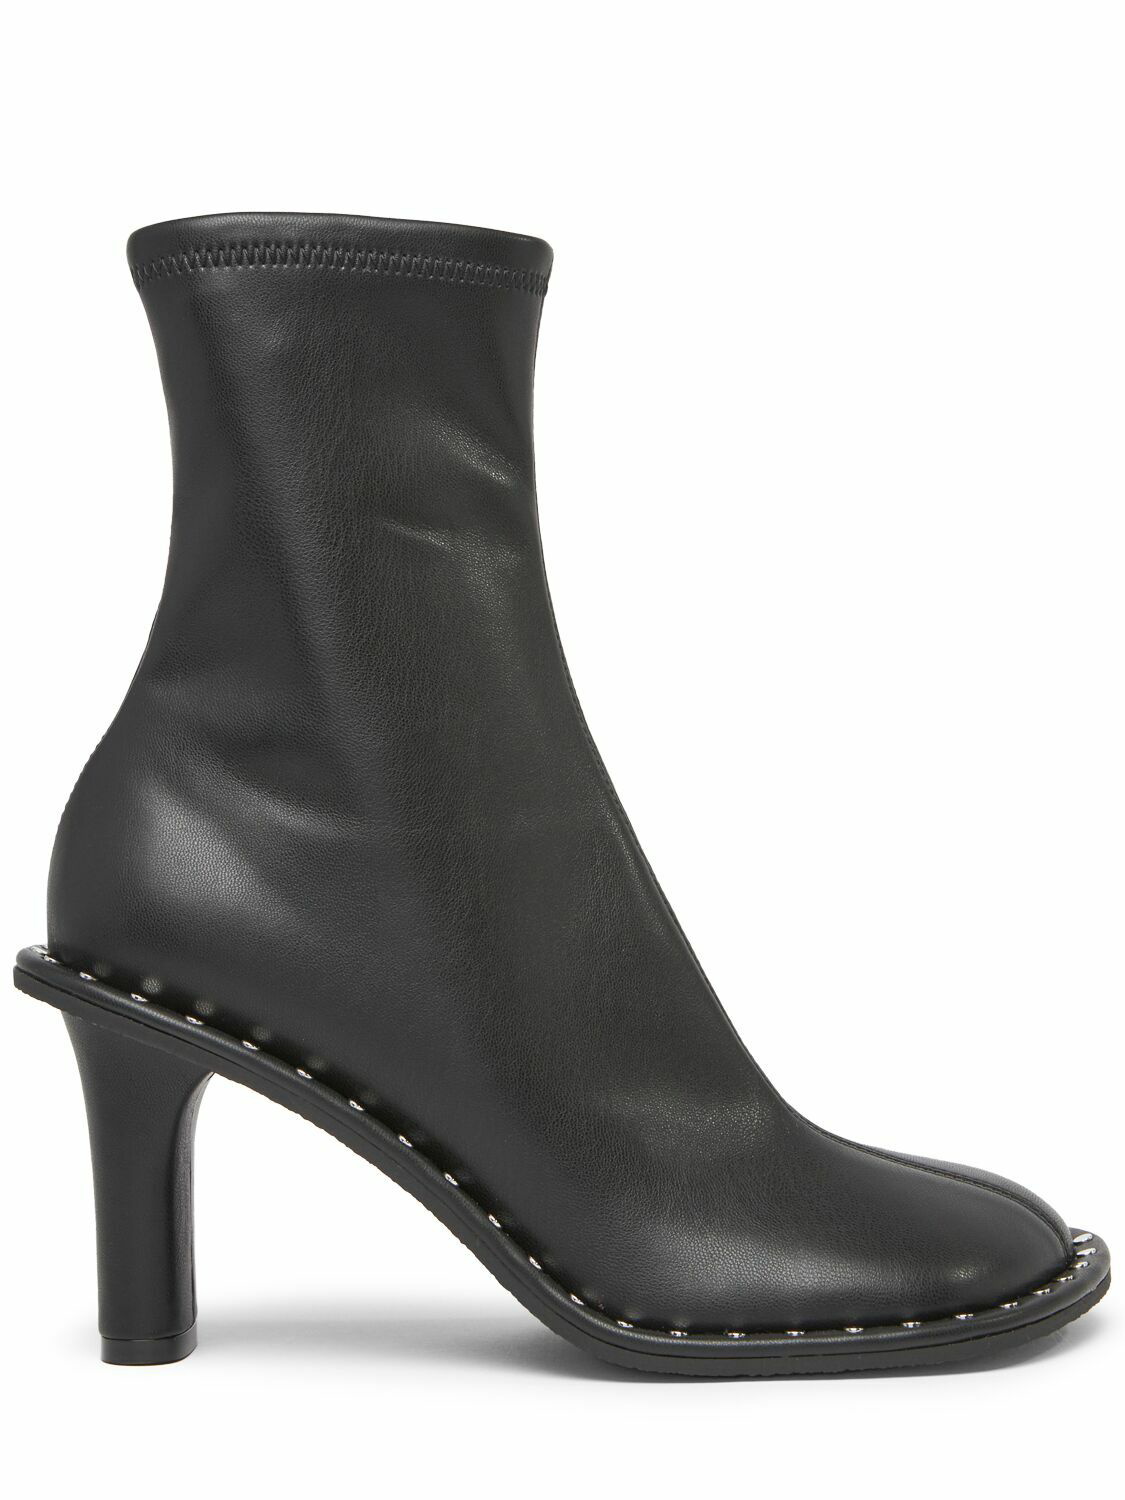 STELLA MCCARTNEY 85mm Ryder Faux Leather Ankle Boots